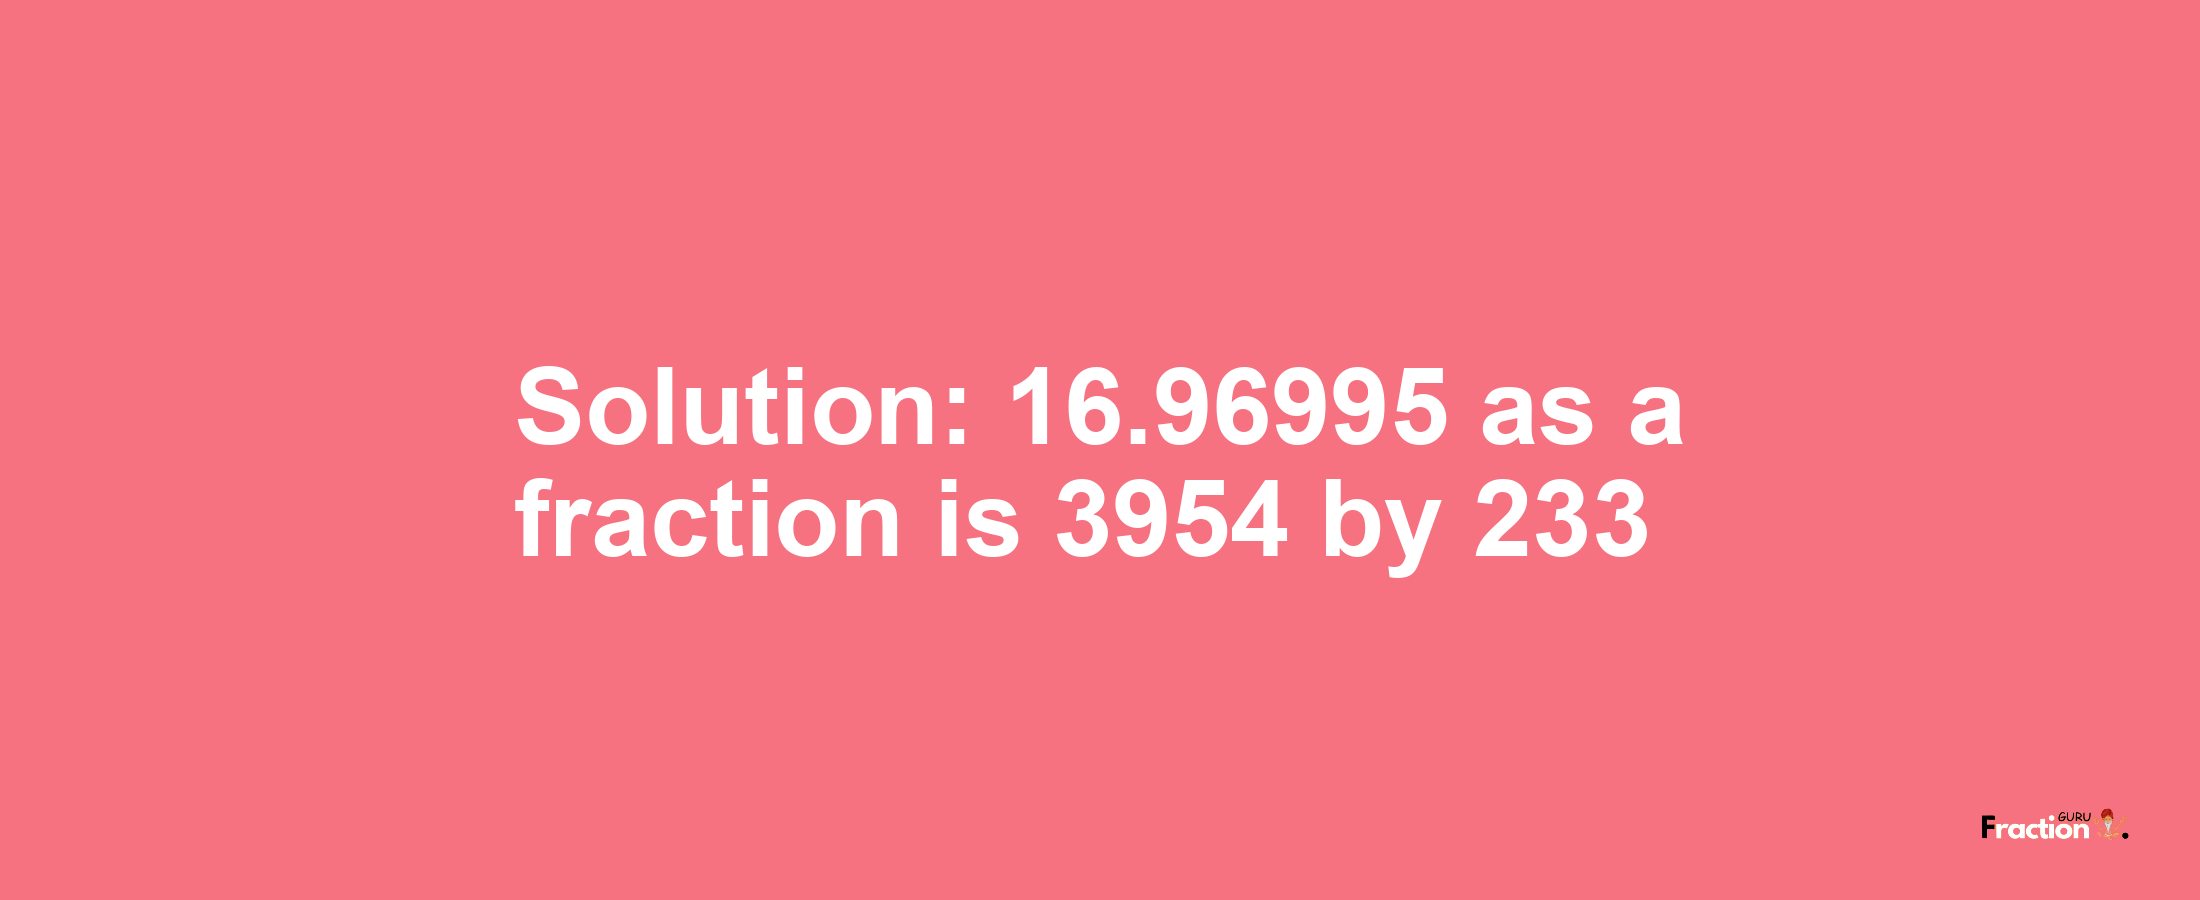 Solution:16.96995 as a fraction is 3954/233